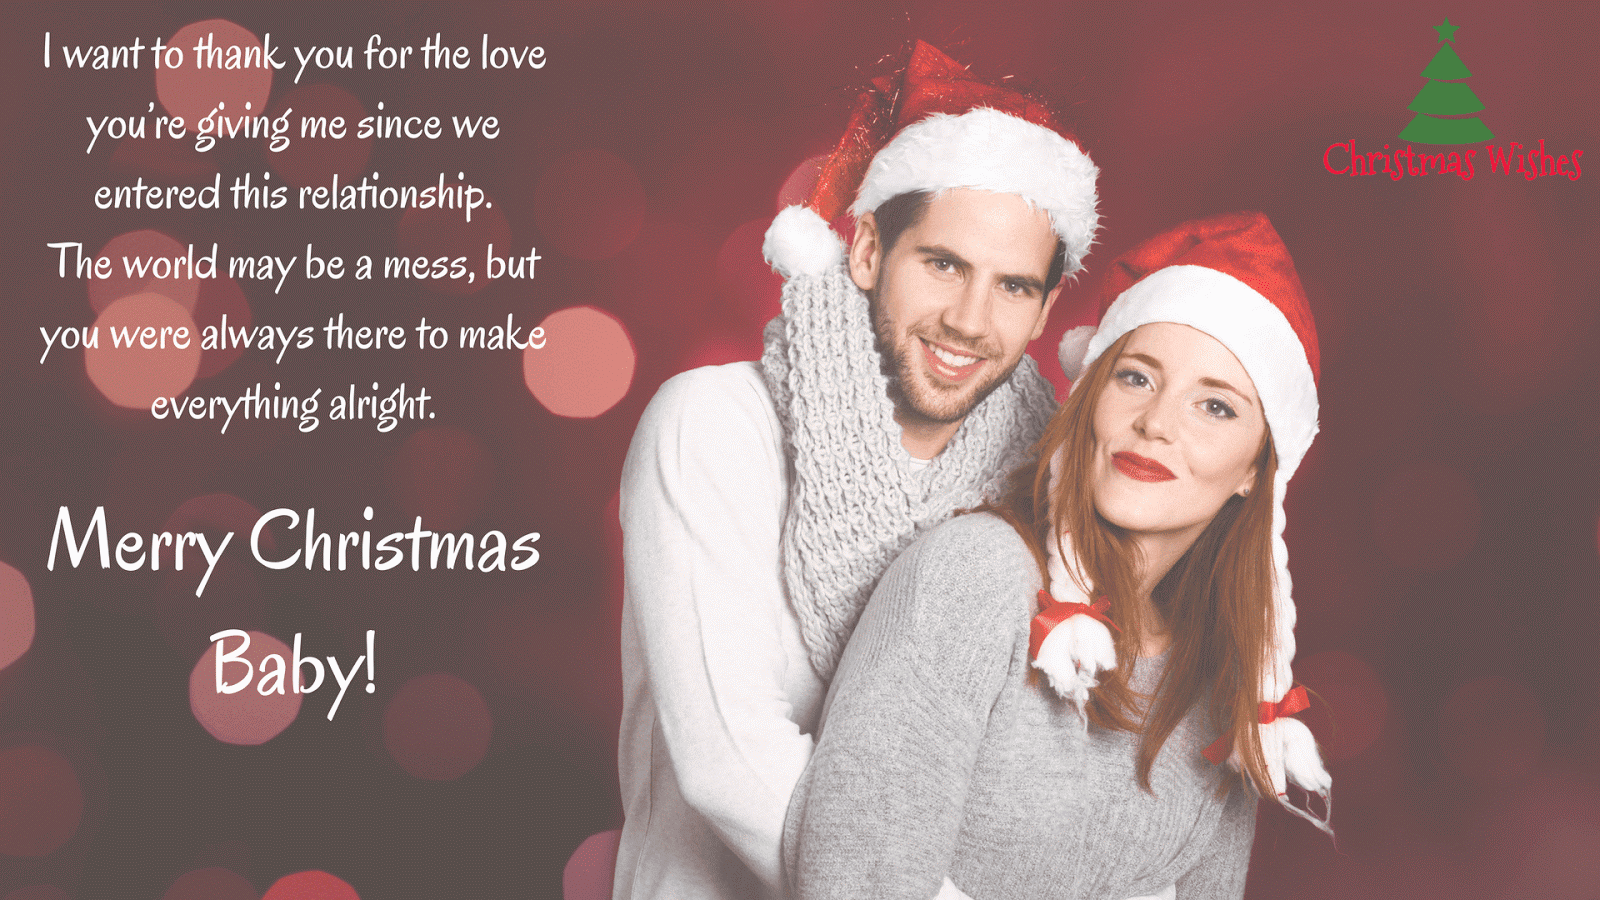 20 Beautiful Merry Christmas Messages And Wishes For Your Girlfriend 2022 Frohe Weihnachten